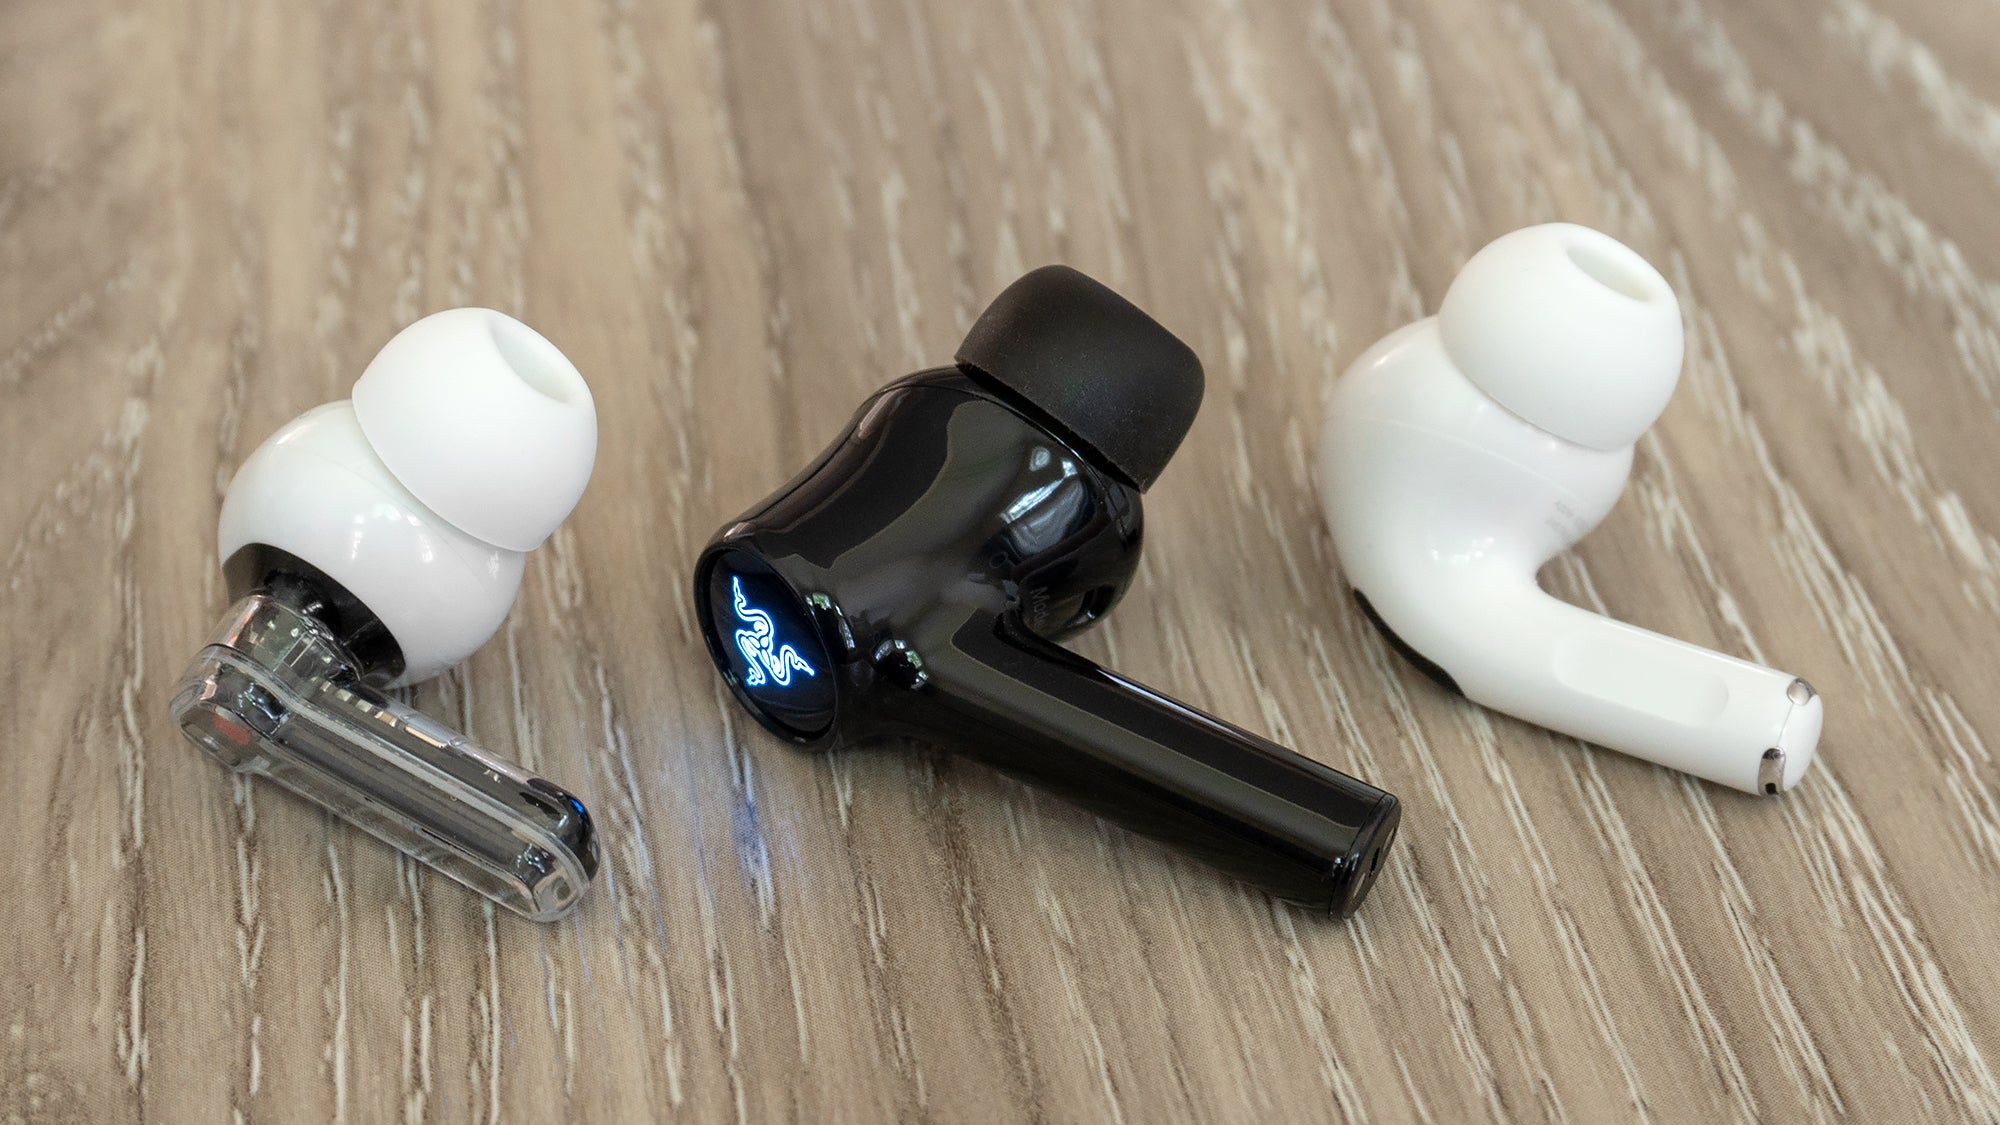 The new Razer Hammerhead True Wireless Earbuds are larger than other earbuds that use the stem design, but still feel light and secure in your ears. (Photo: Andrew Liszewski - Gizmodo)